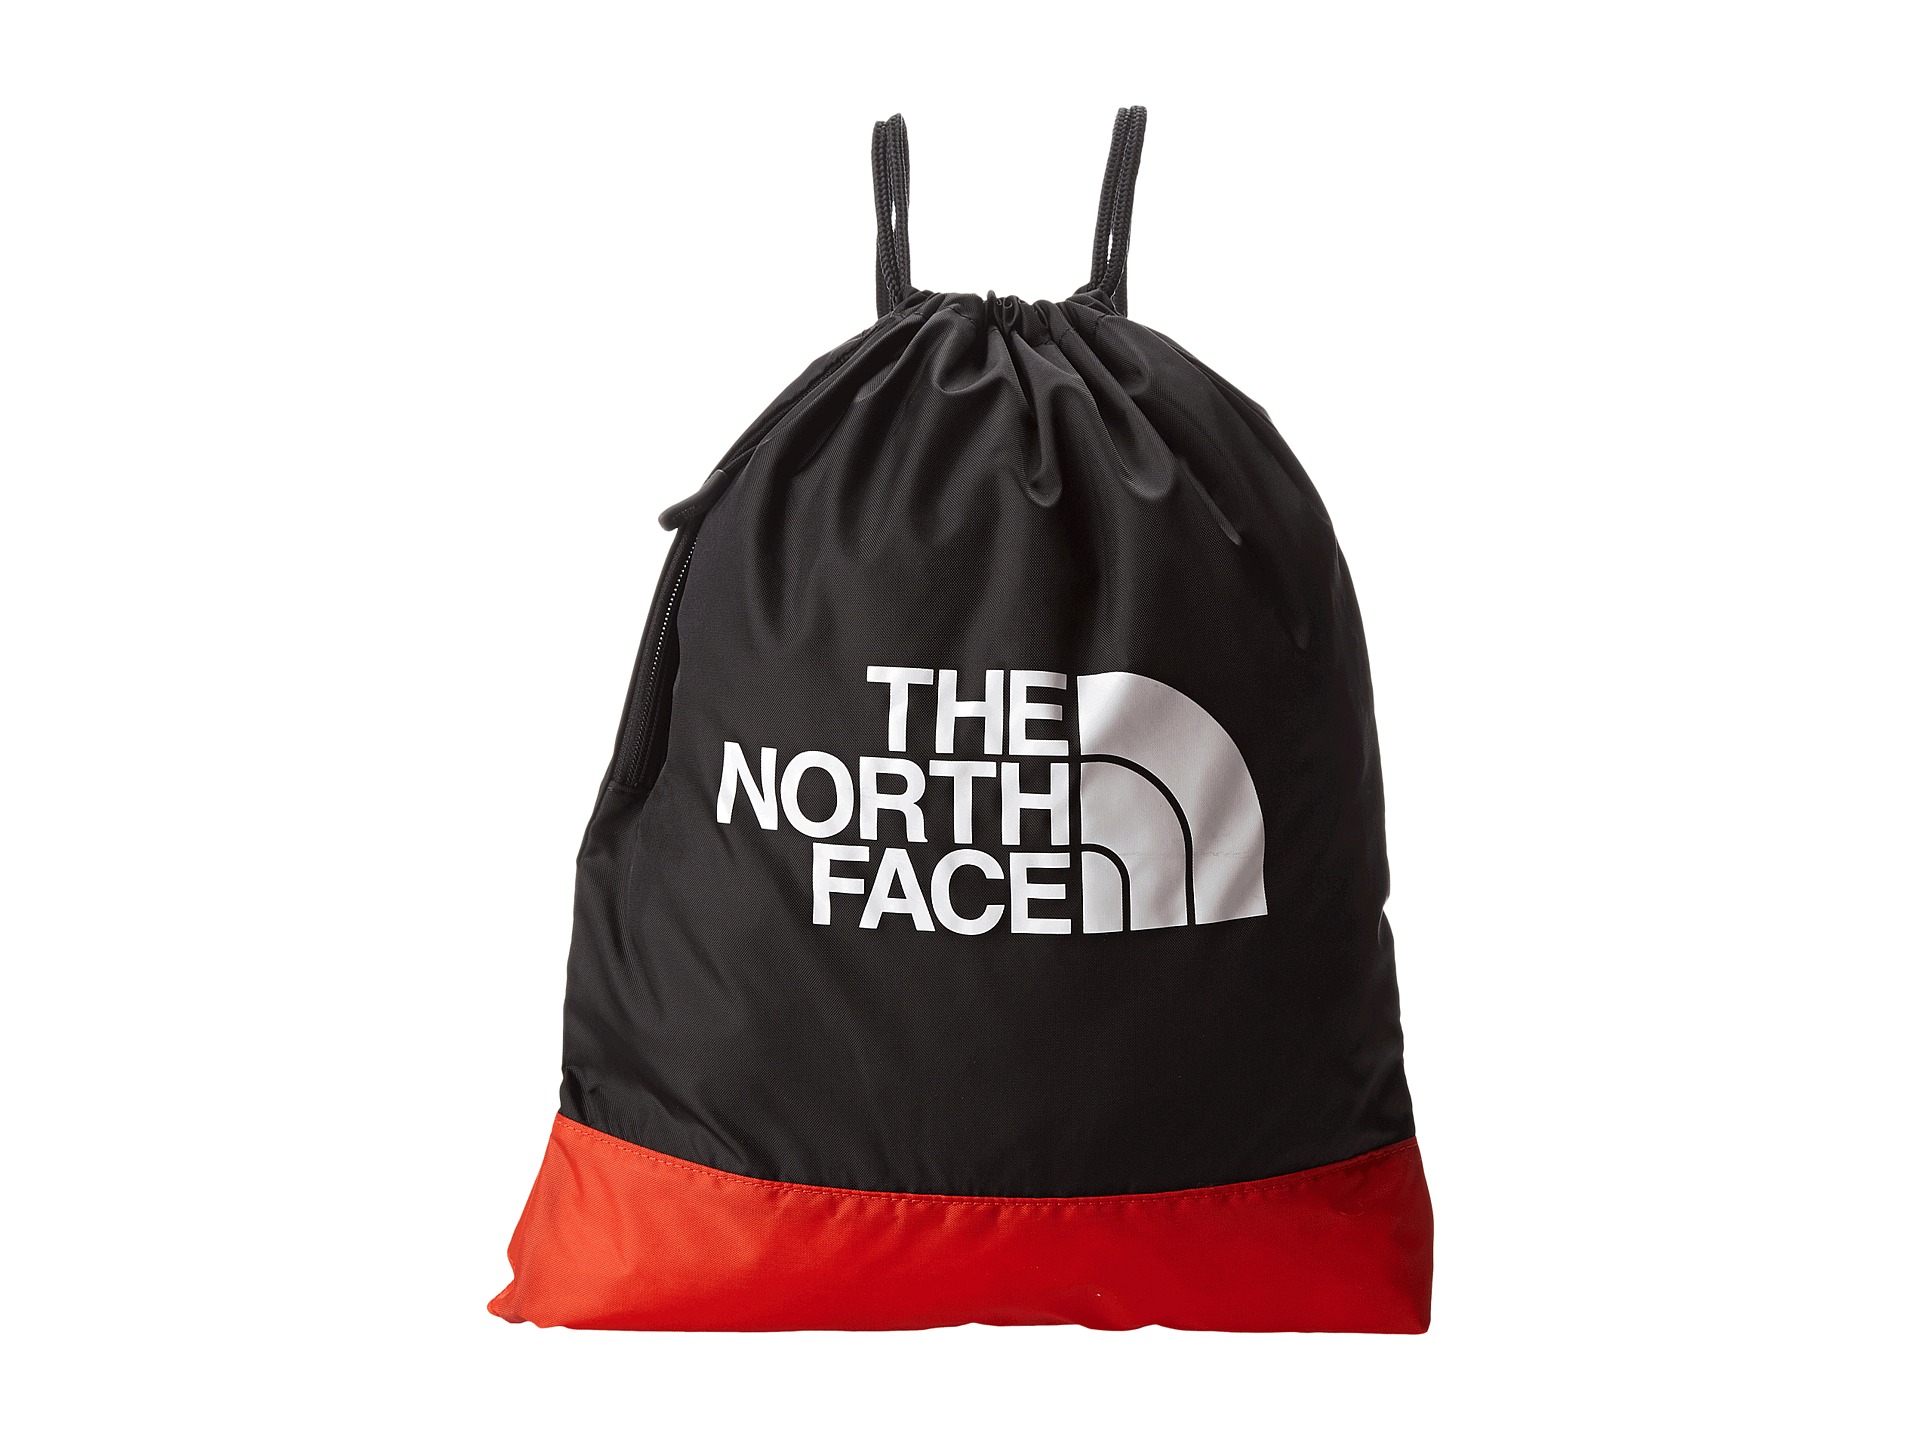 The North Face Sack Pack | Shipped Free at Zappos